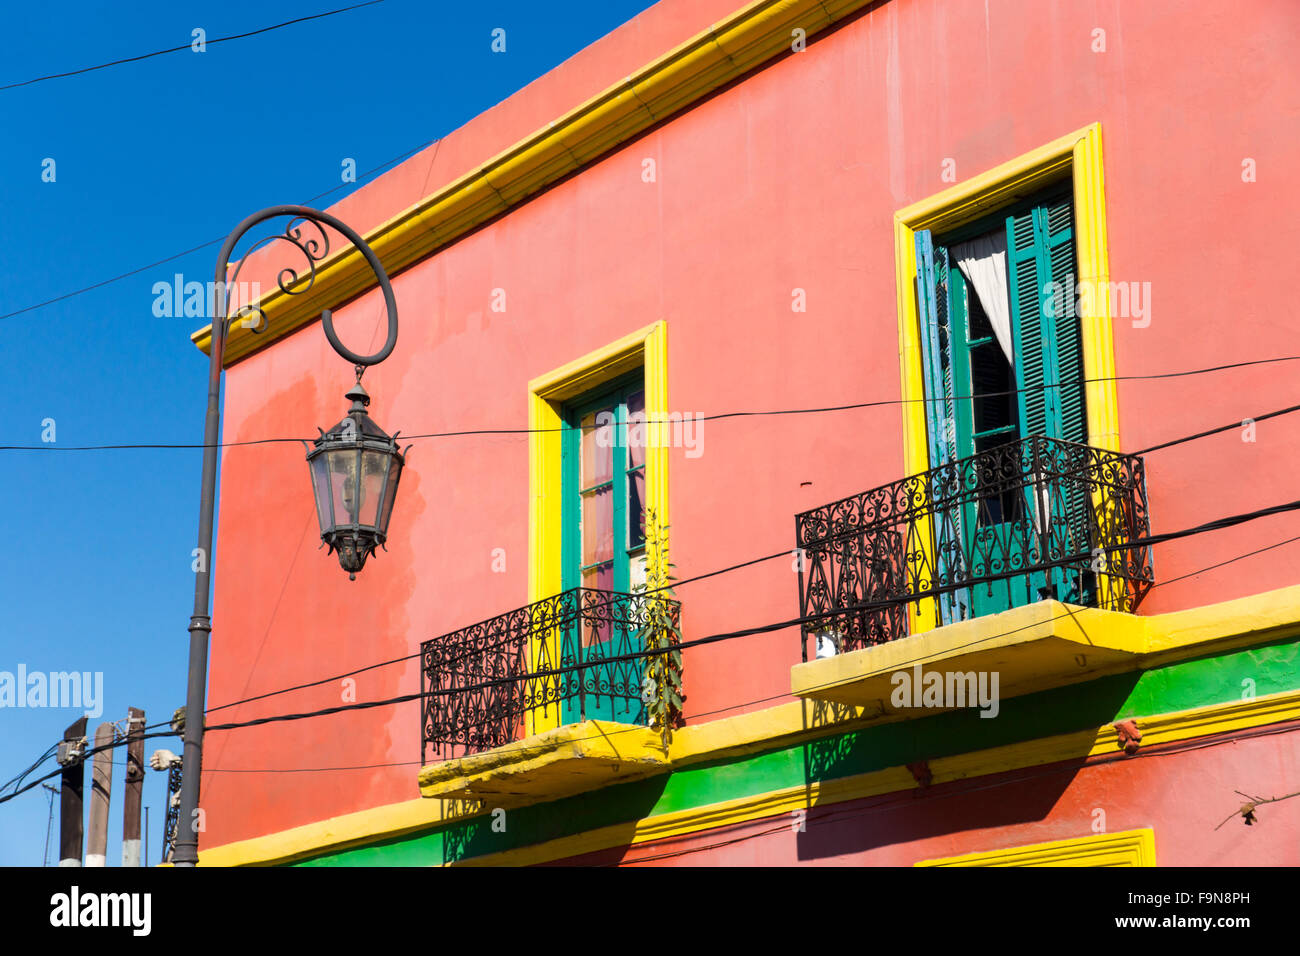 One of the colourful houses of La Boca, Buenos Aires Stock Photo